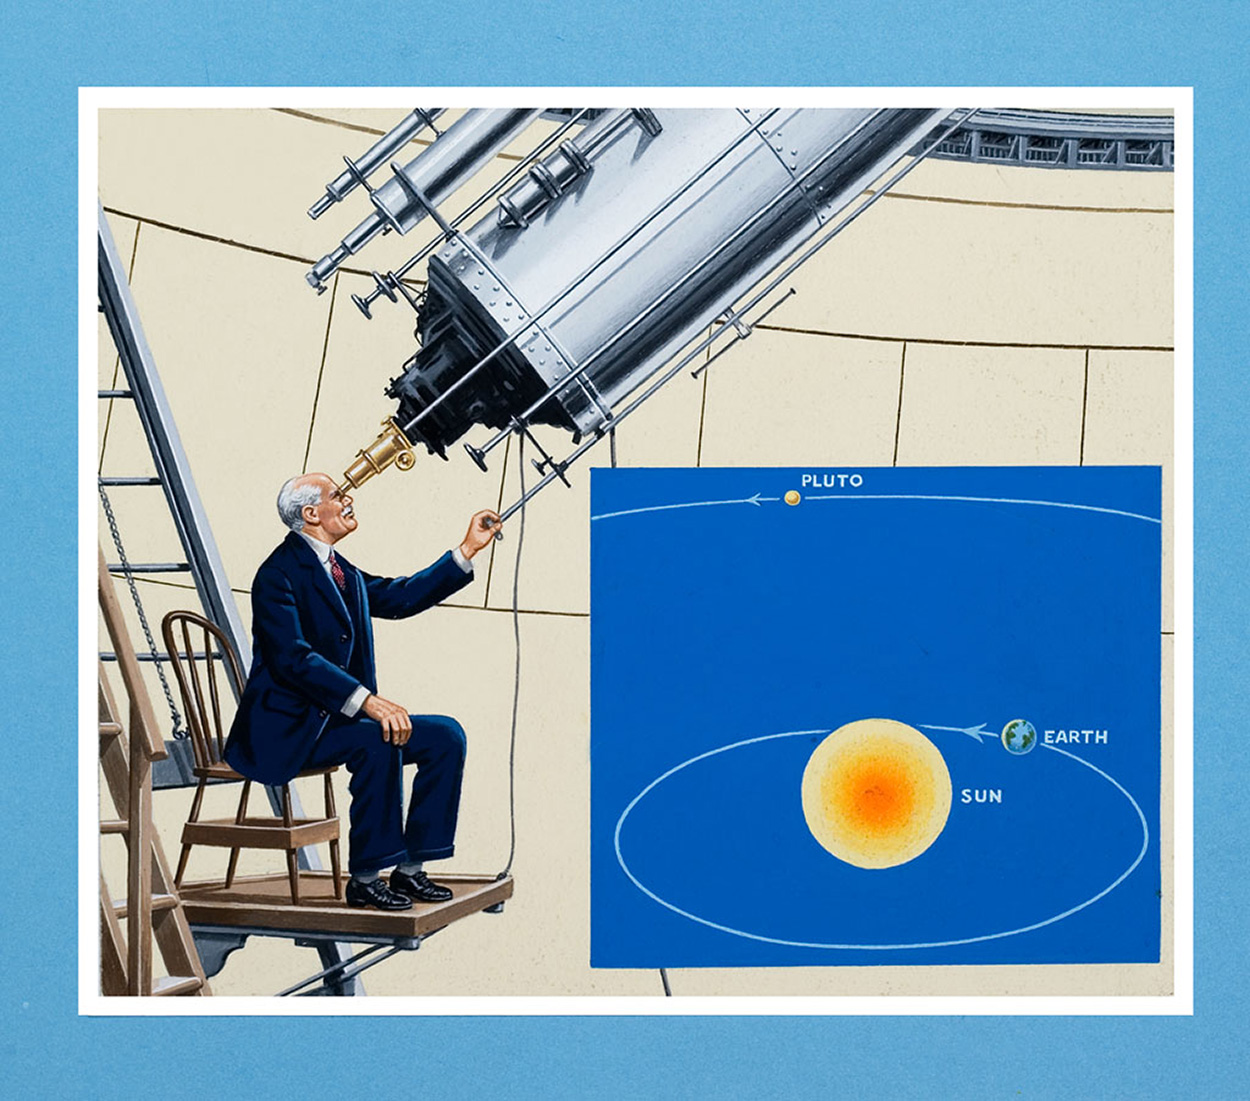 Percival Lowell and the Discovery of Pluto (Original) art by John Keay Art at The Illustration Art Gallery